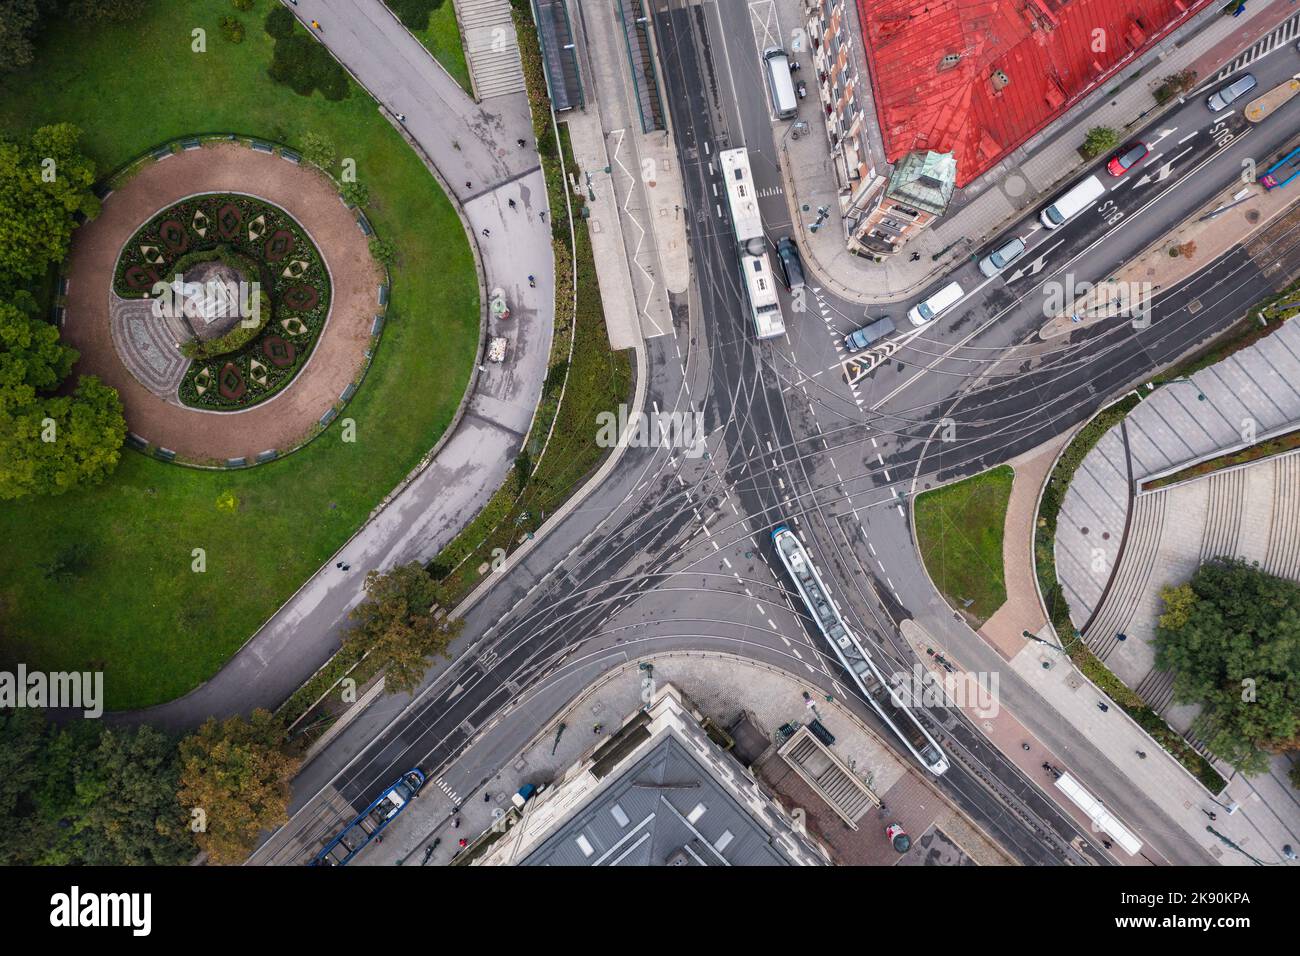 Cracow, Lesser Poland, Poland - September 22 2022: Aerial view of tram rails, tram, bus, intersection Pawia and Lubicz street, Palnty and Floryjan Str Stock Photo